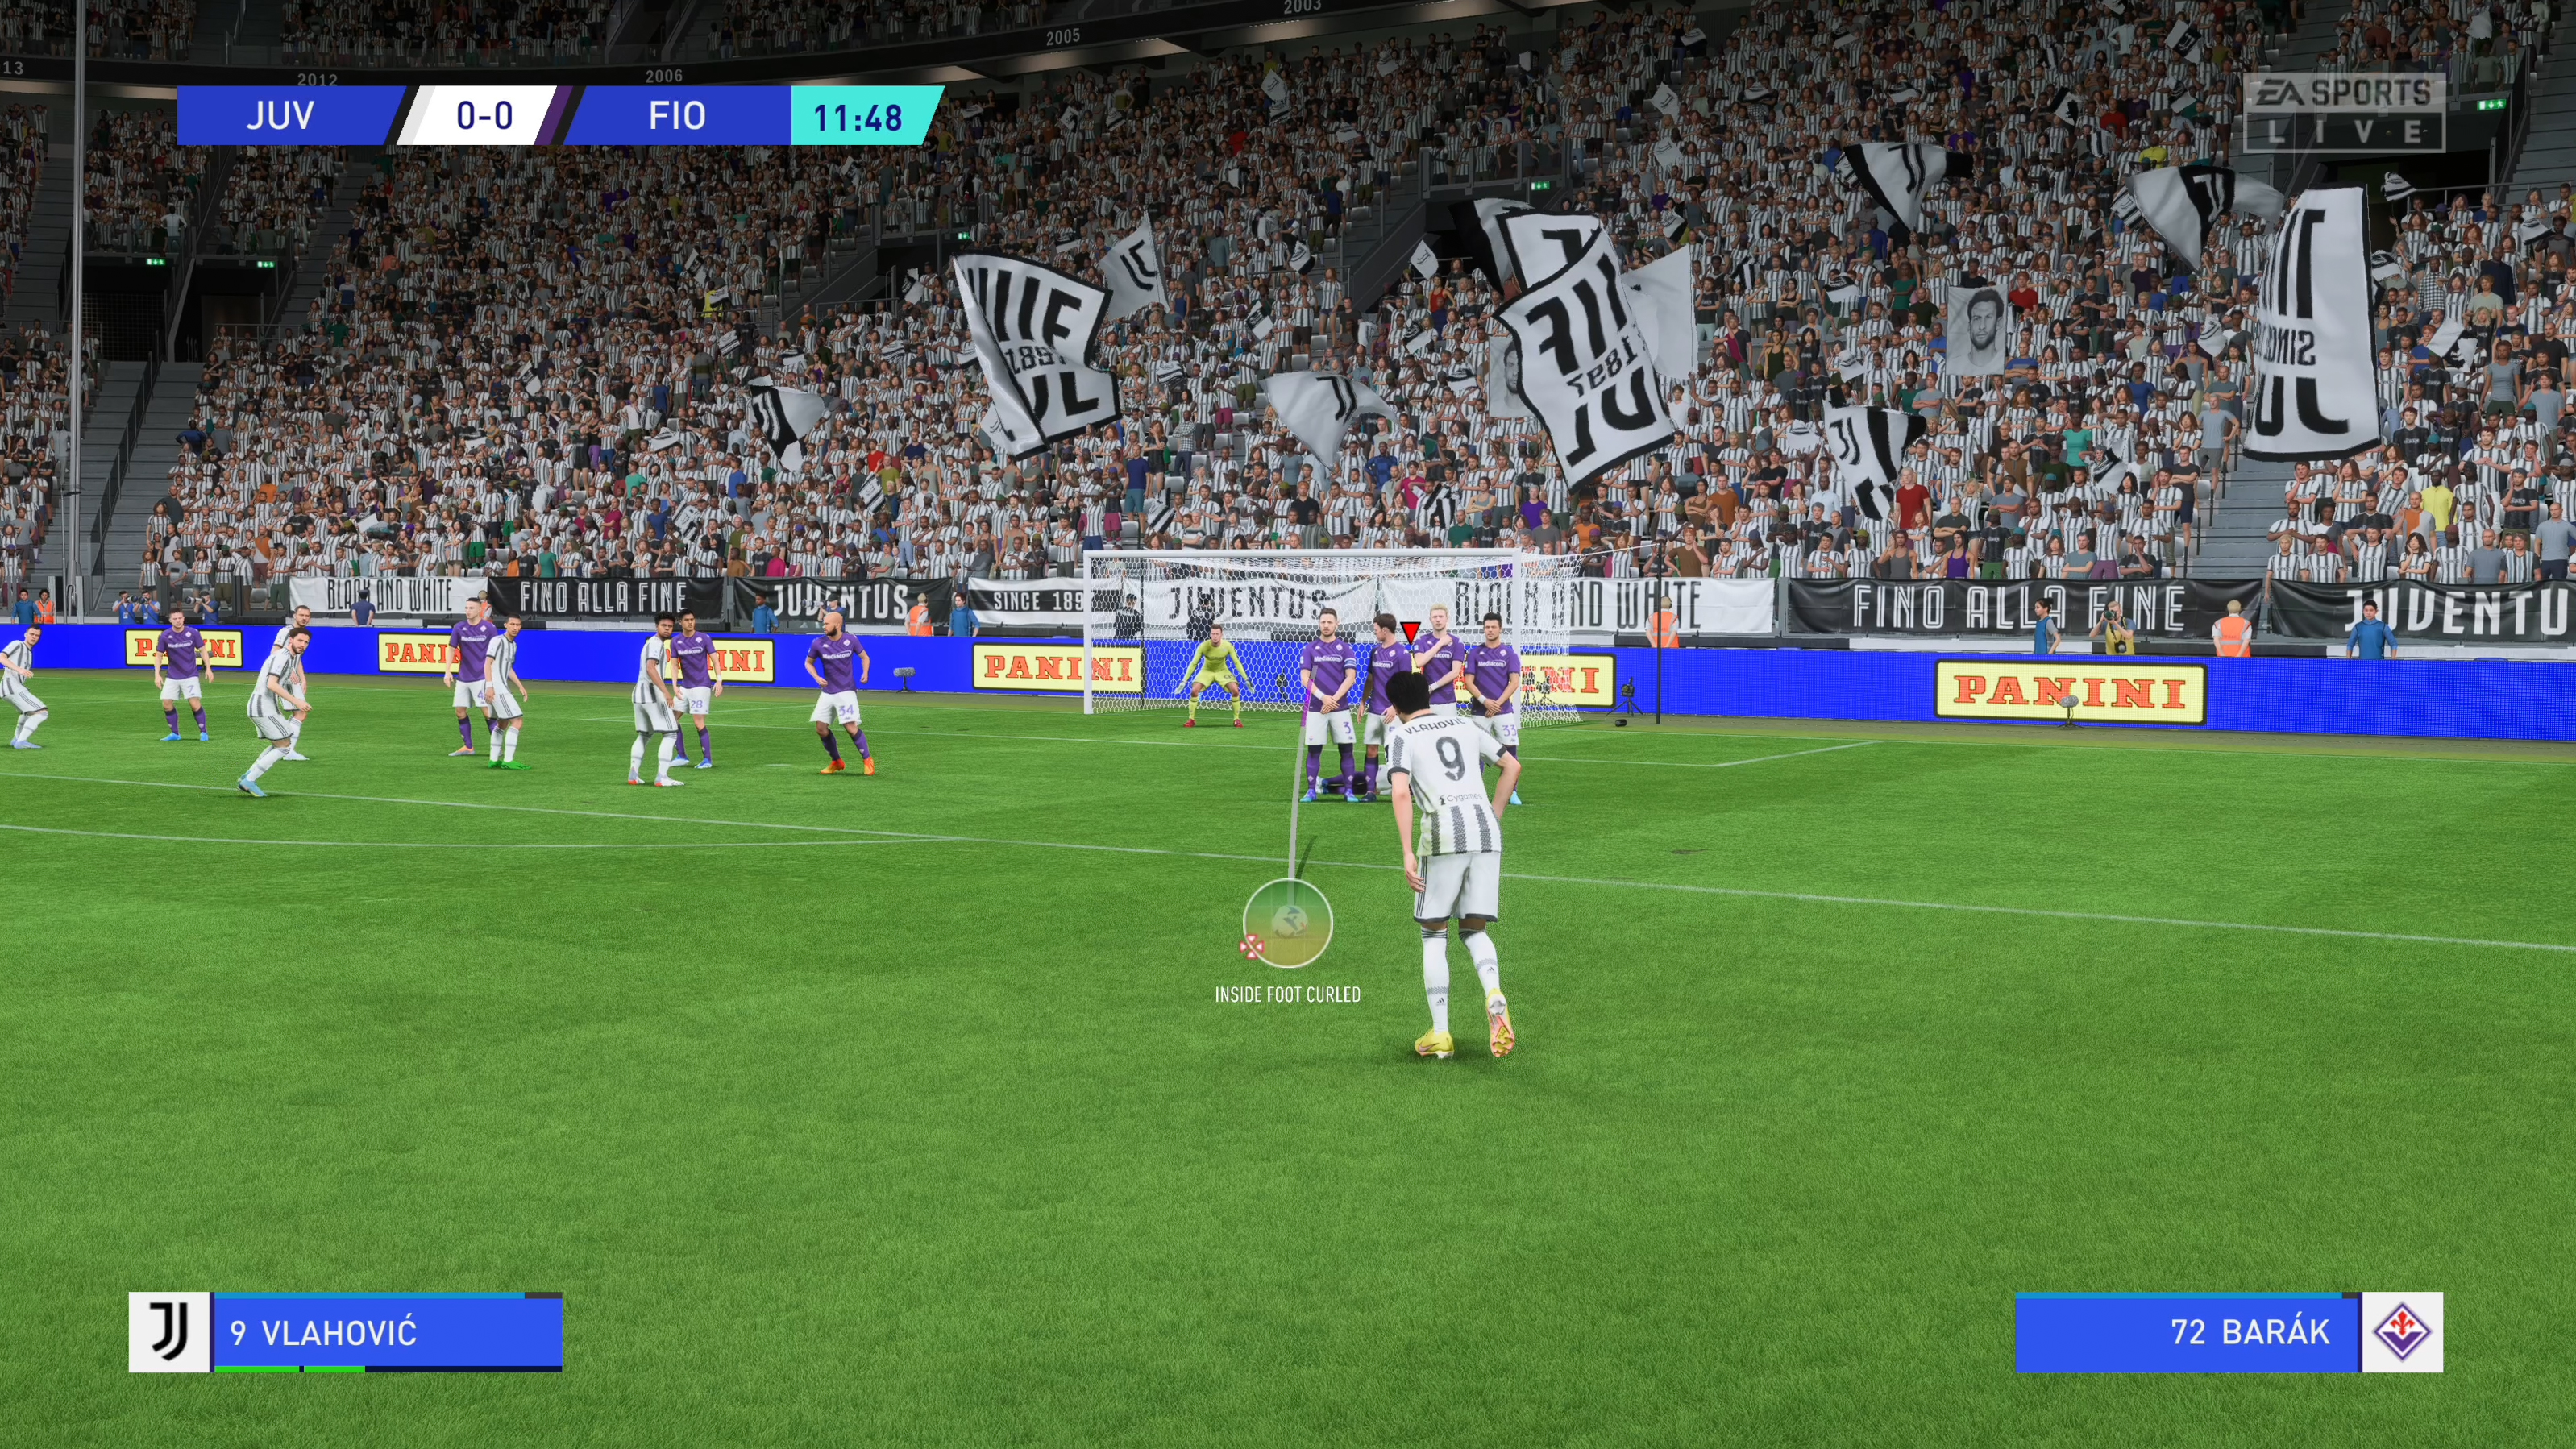 FIFA 19 Can't Enter Weekend League